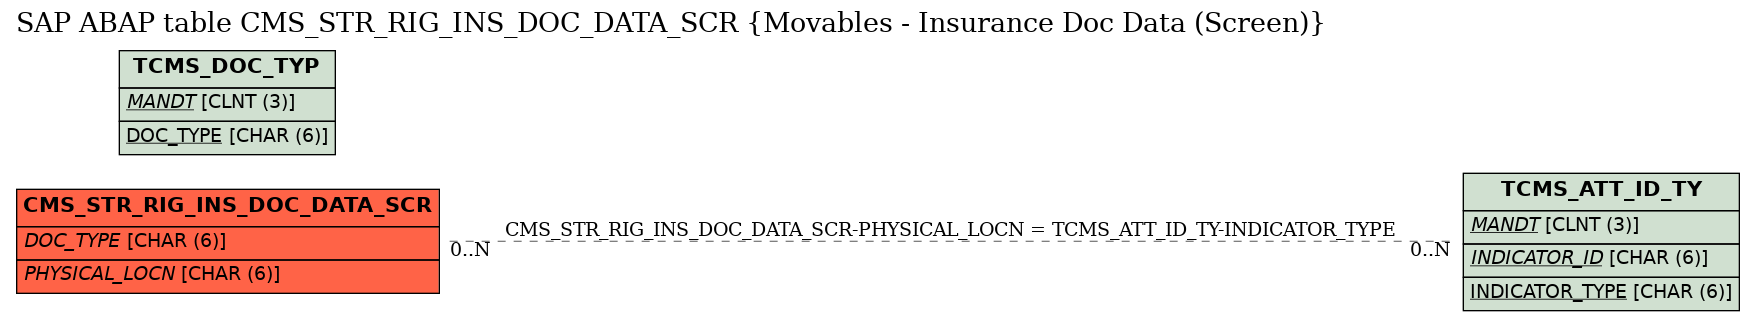 E-R Diagram for table CMS_STR_RIG_INS_DOC_DATA_SCR (Movables - Insurance Doc Data (Screen))